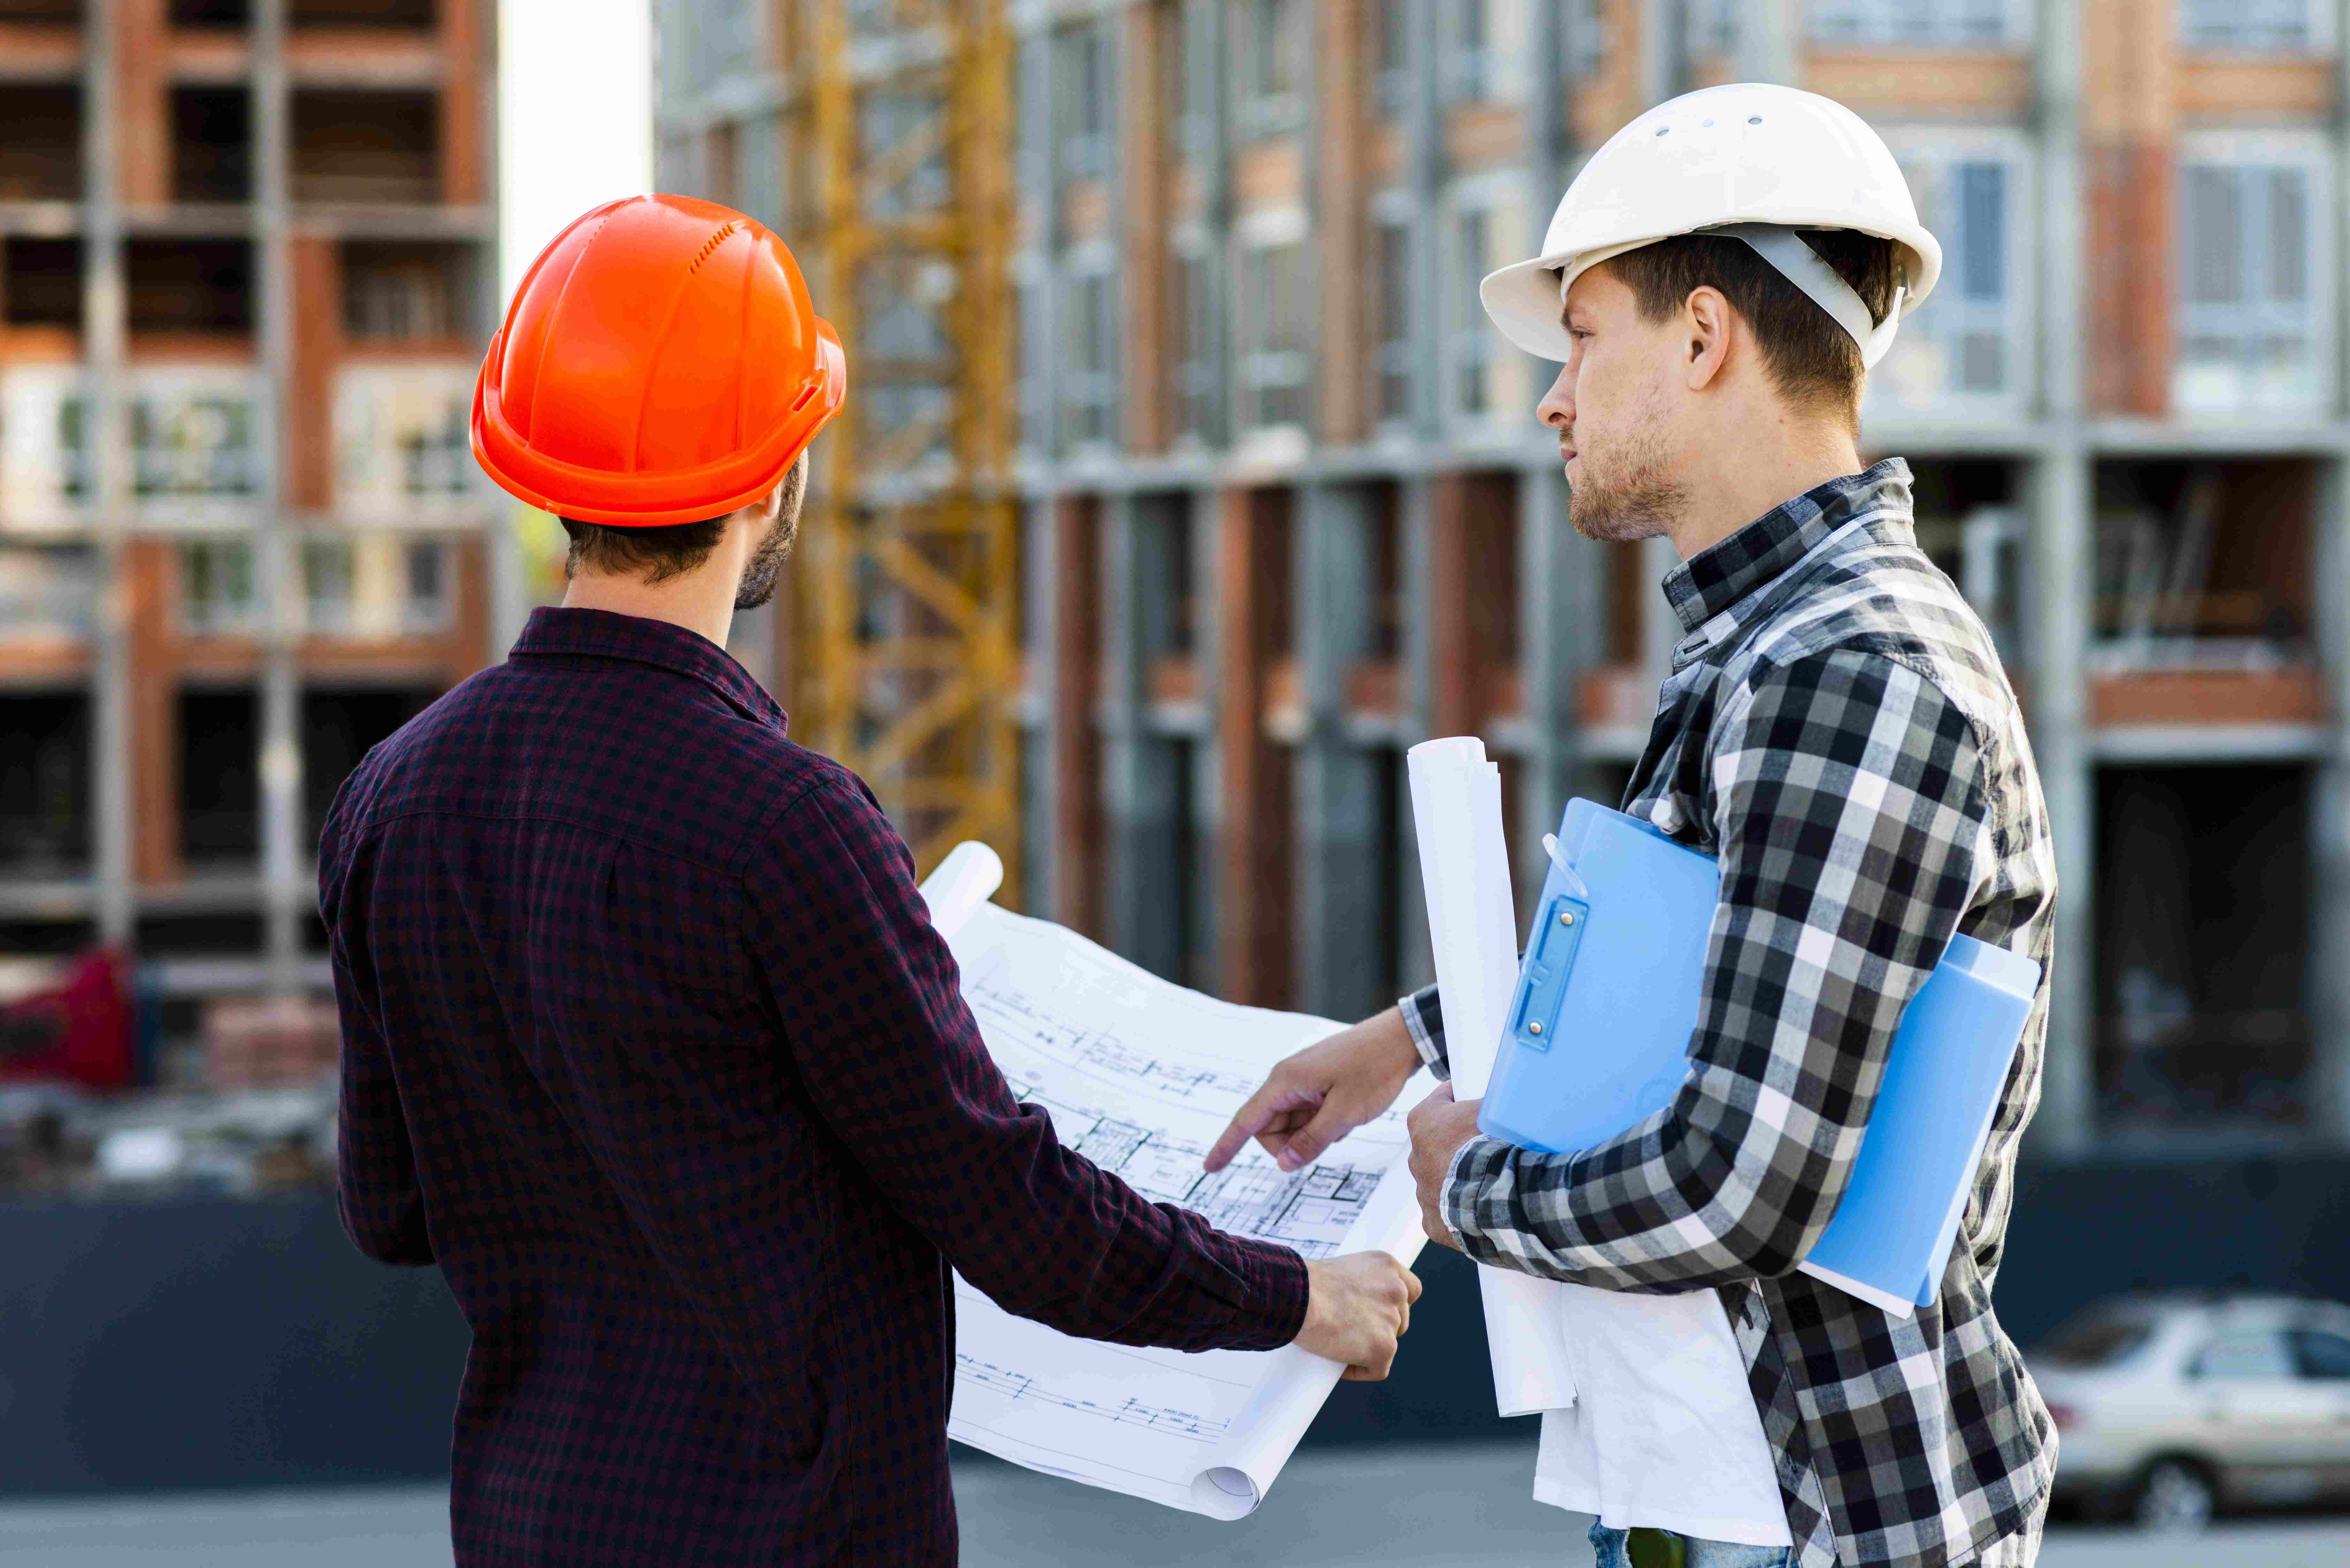 Civil Construction Courses for International Students